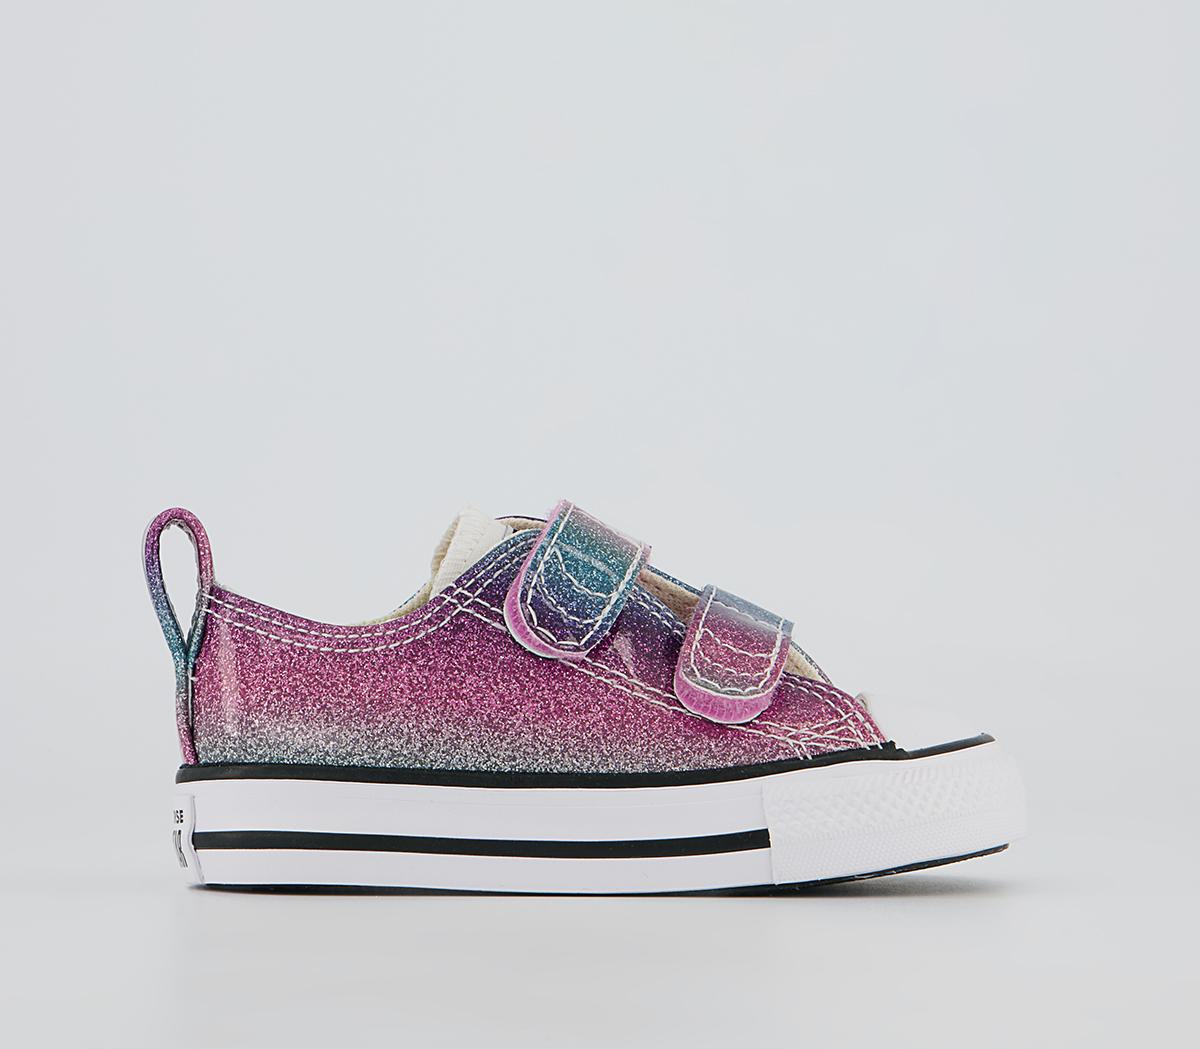 ConverseAll Star 2vlace TrainersPink Purple Teal Glitter